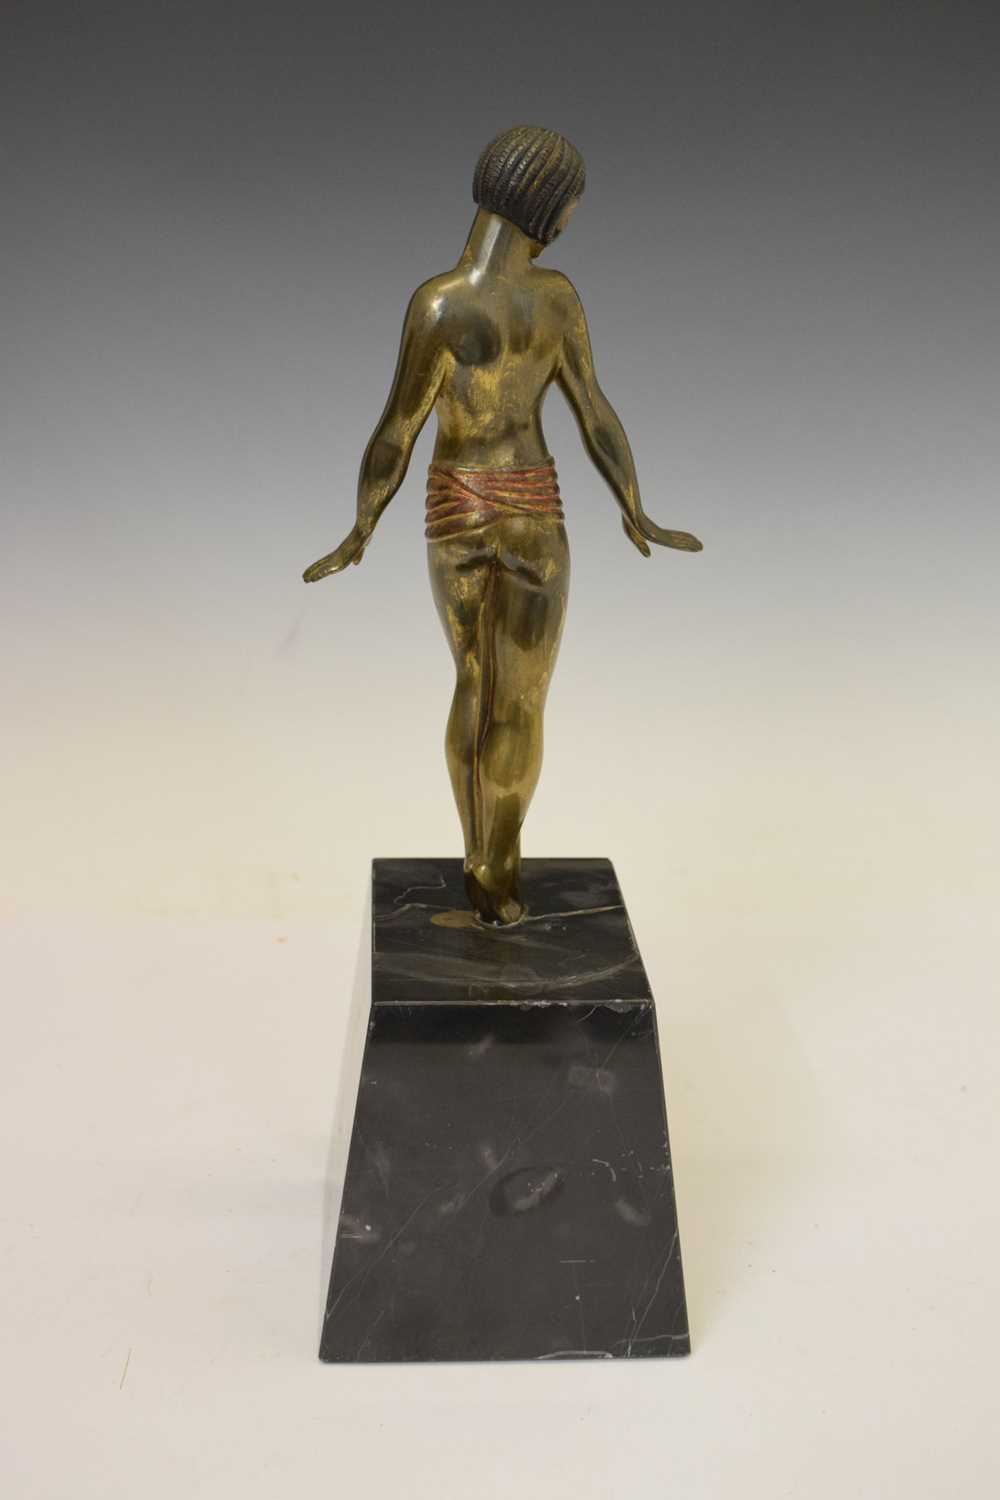 Reproduction bronzed figure of an Art Deco-style dancer - Image 7 of 9